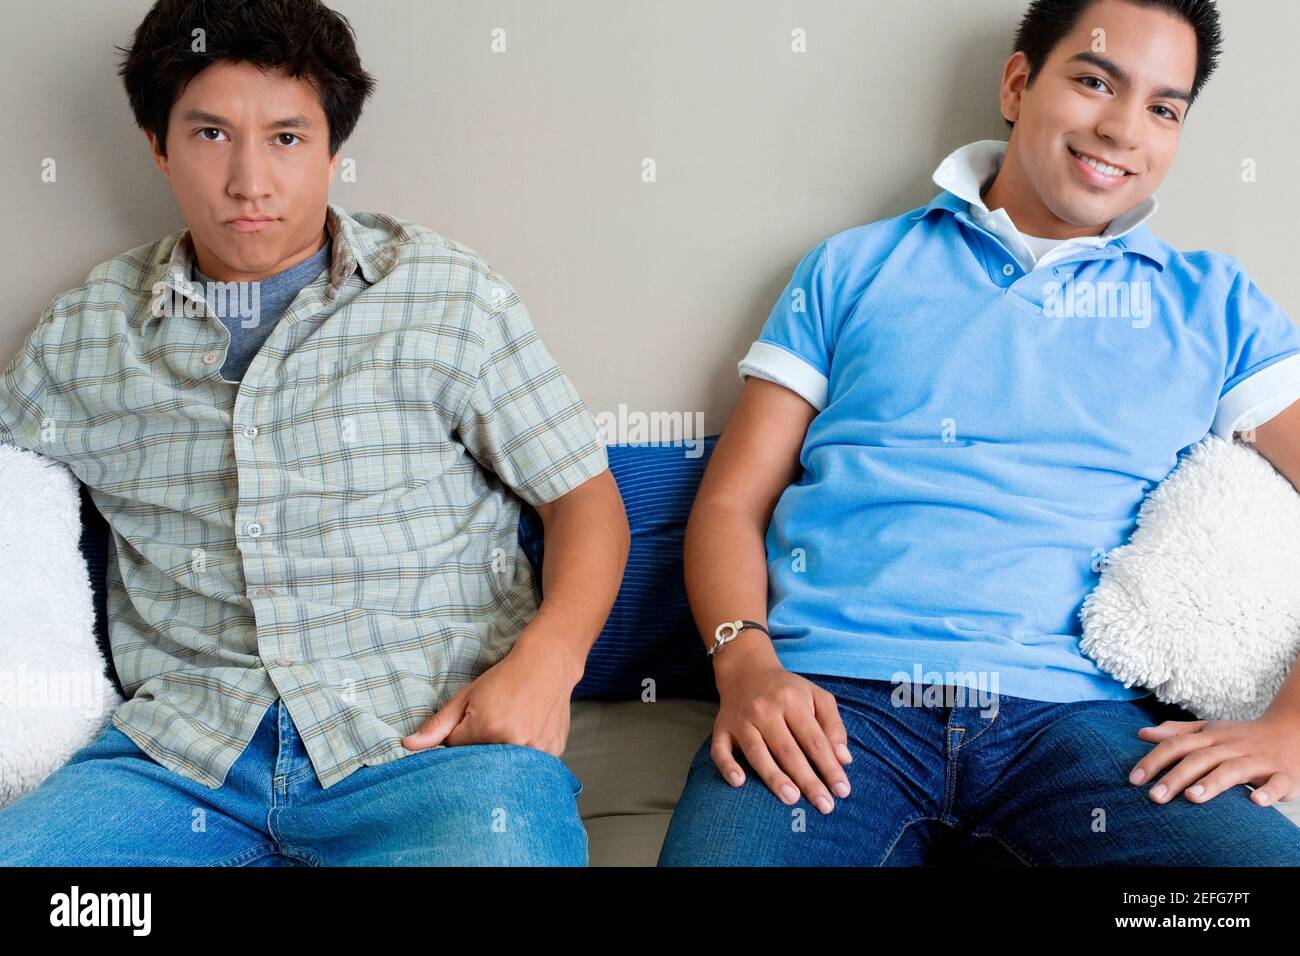 Two young men sitting on a couch Stock Photo